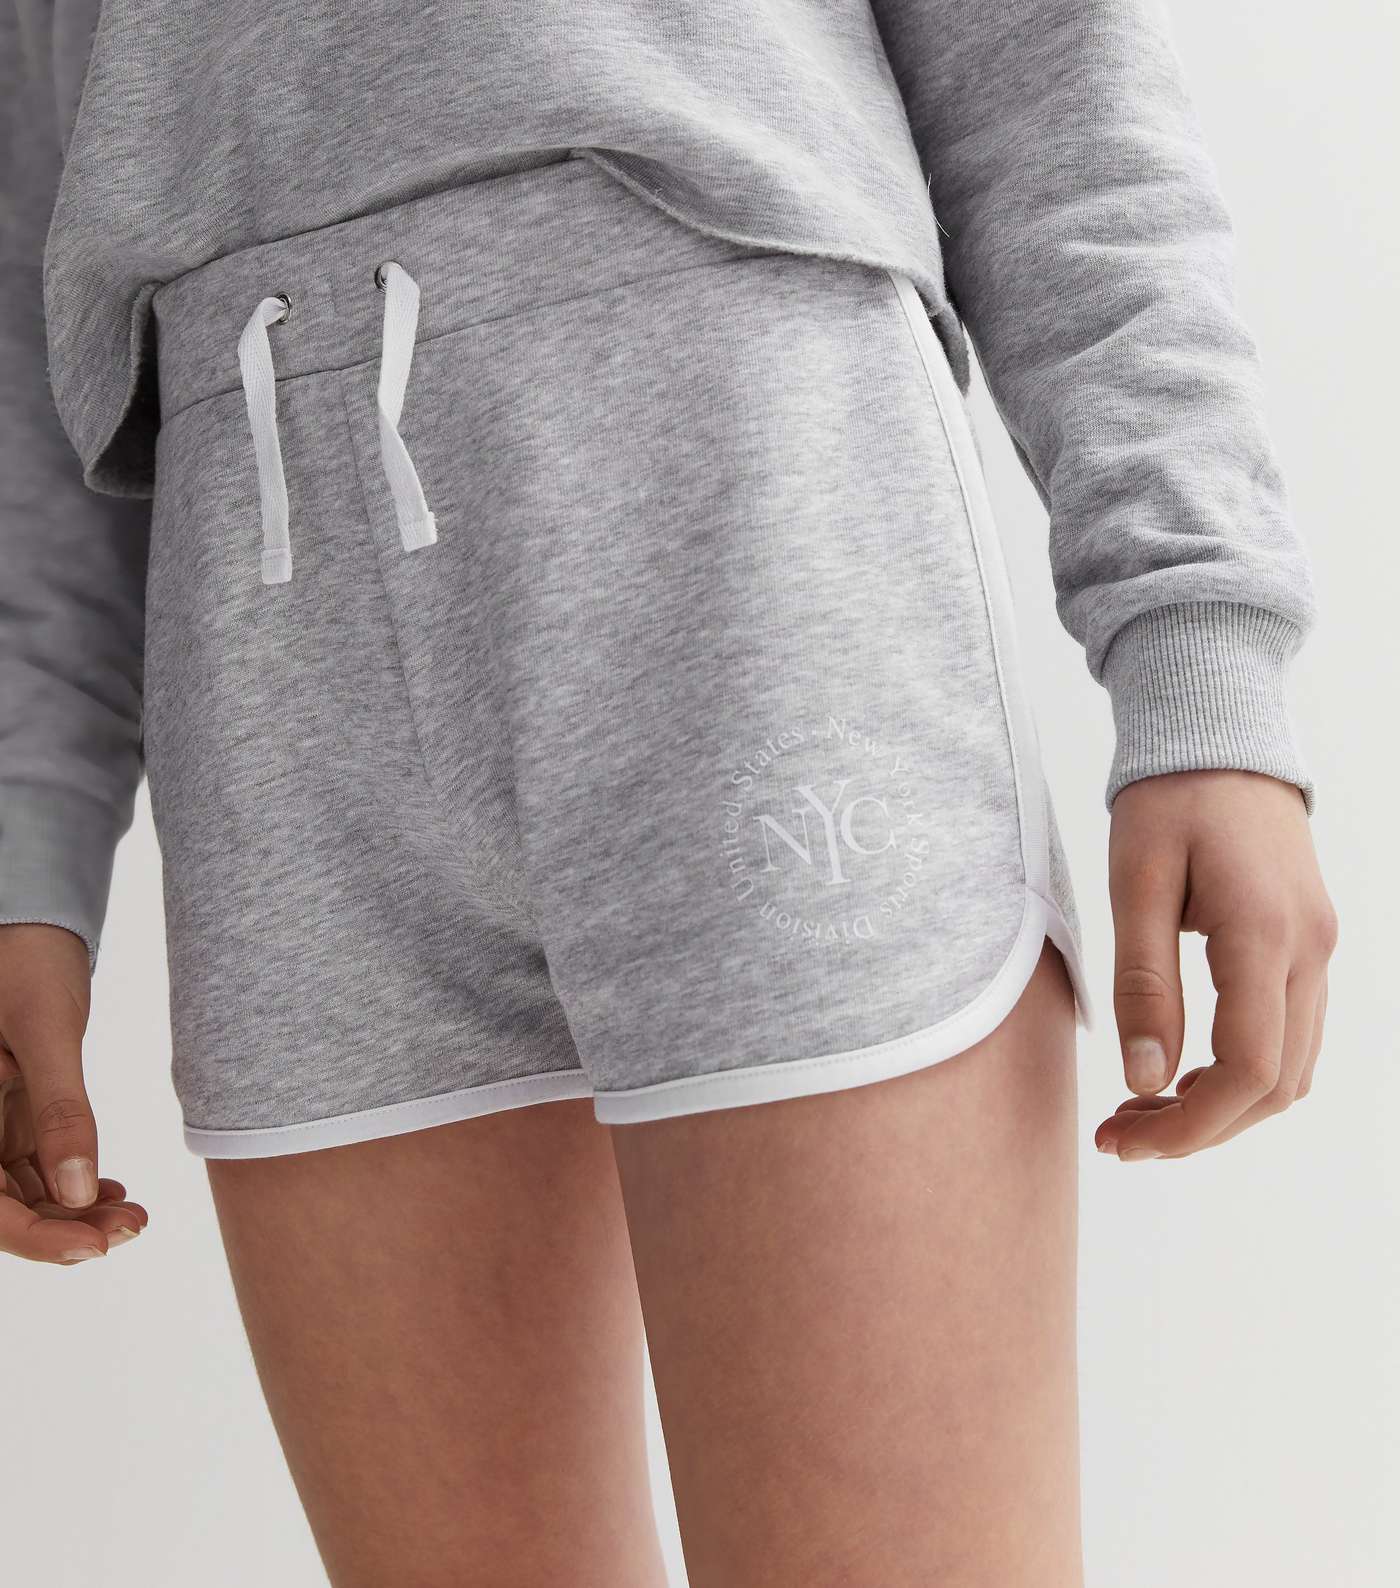 4 Ways to Style GRAY Gym Shorts🤍, Gallery posted by juliadorsey